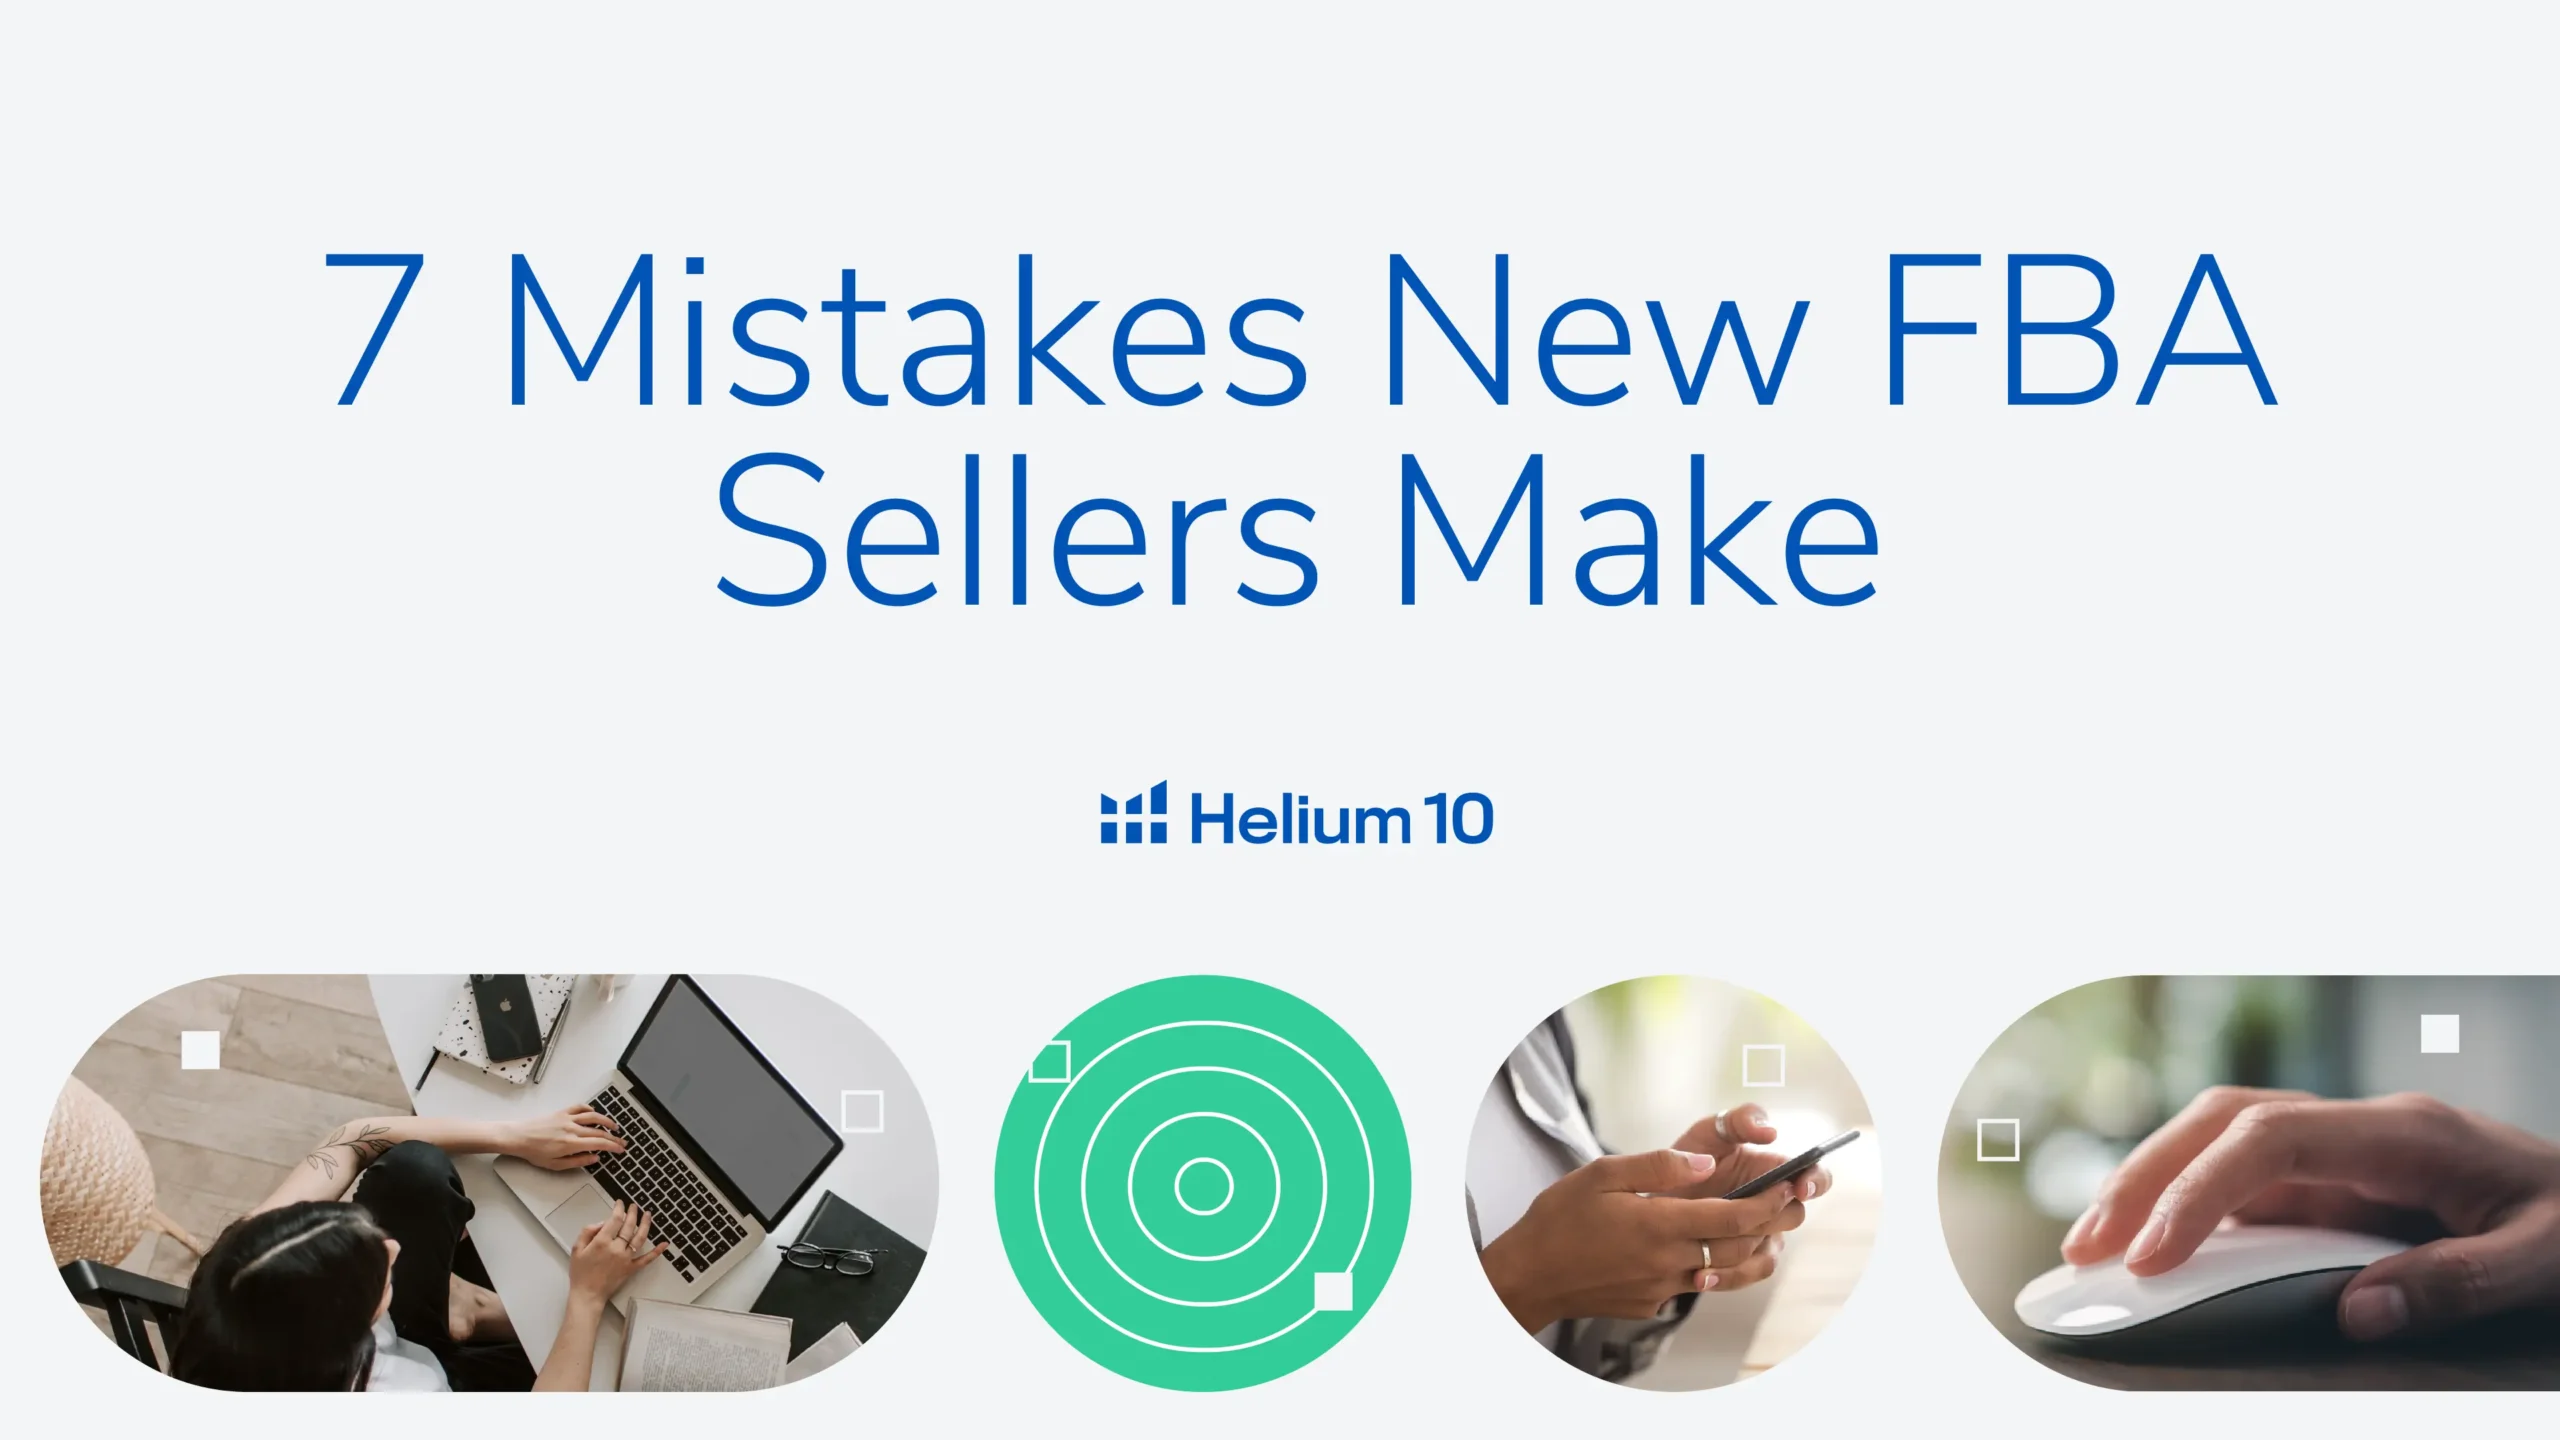 7 Mistakes New FBA Sellers Make